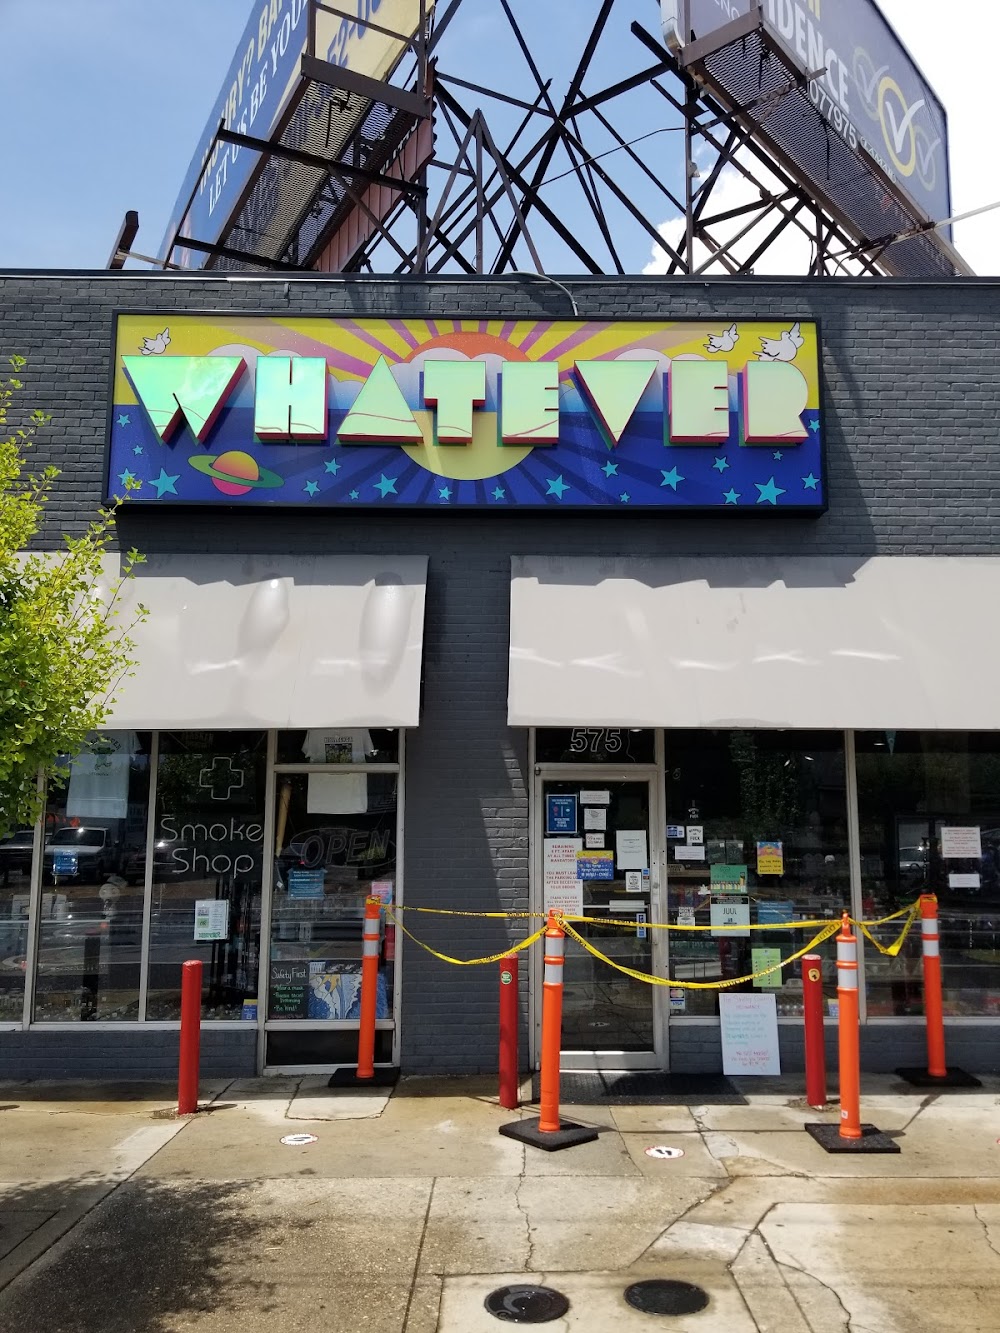 Whatever Shop